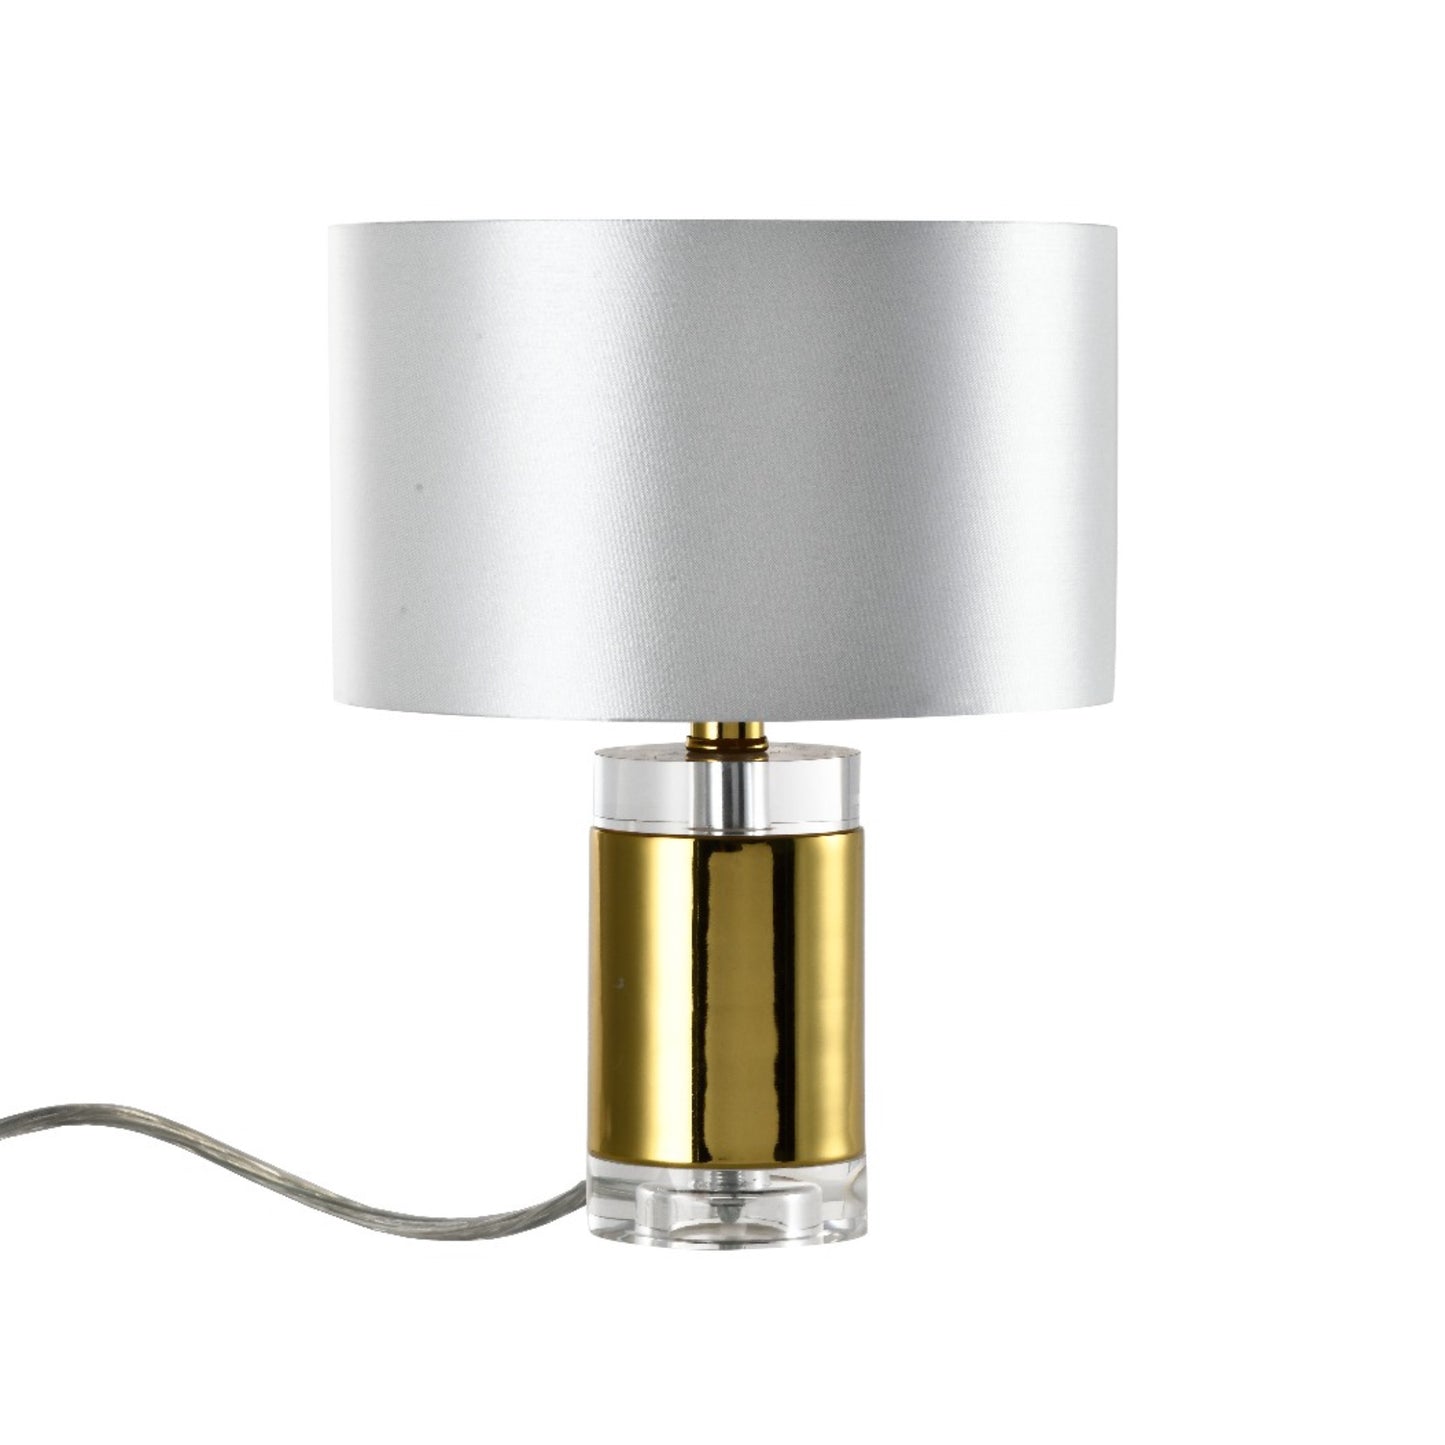 Introducing our Laya table lamp with its elegant crystal and golden finish it will be sure to make a stylish addition to any living space. It features a contemporary crystal and gold base and is complimented by a satin silver and gold inner shade that gives the light an undeniably luxurious style.